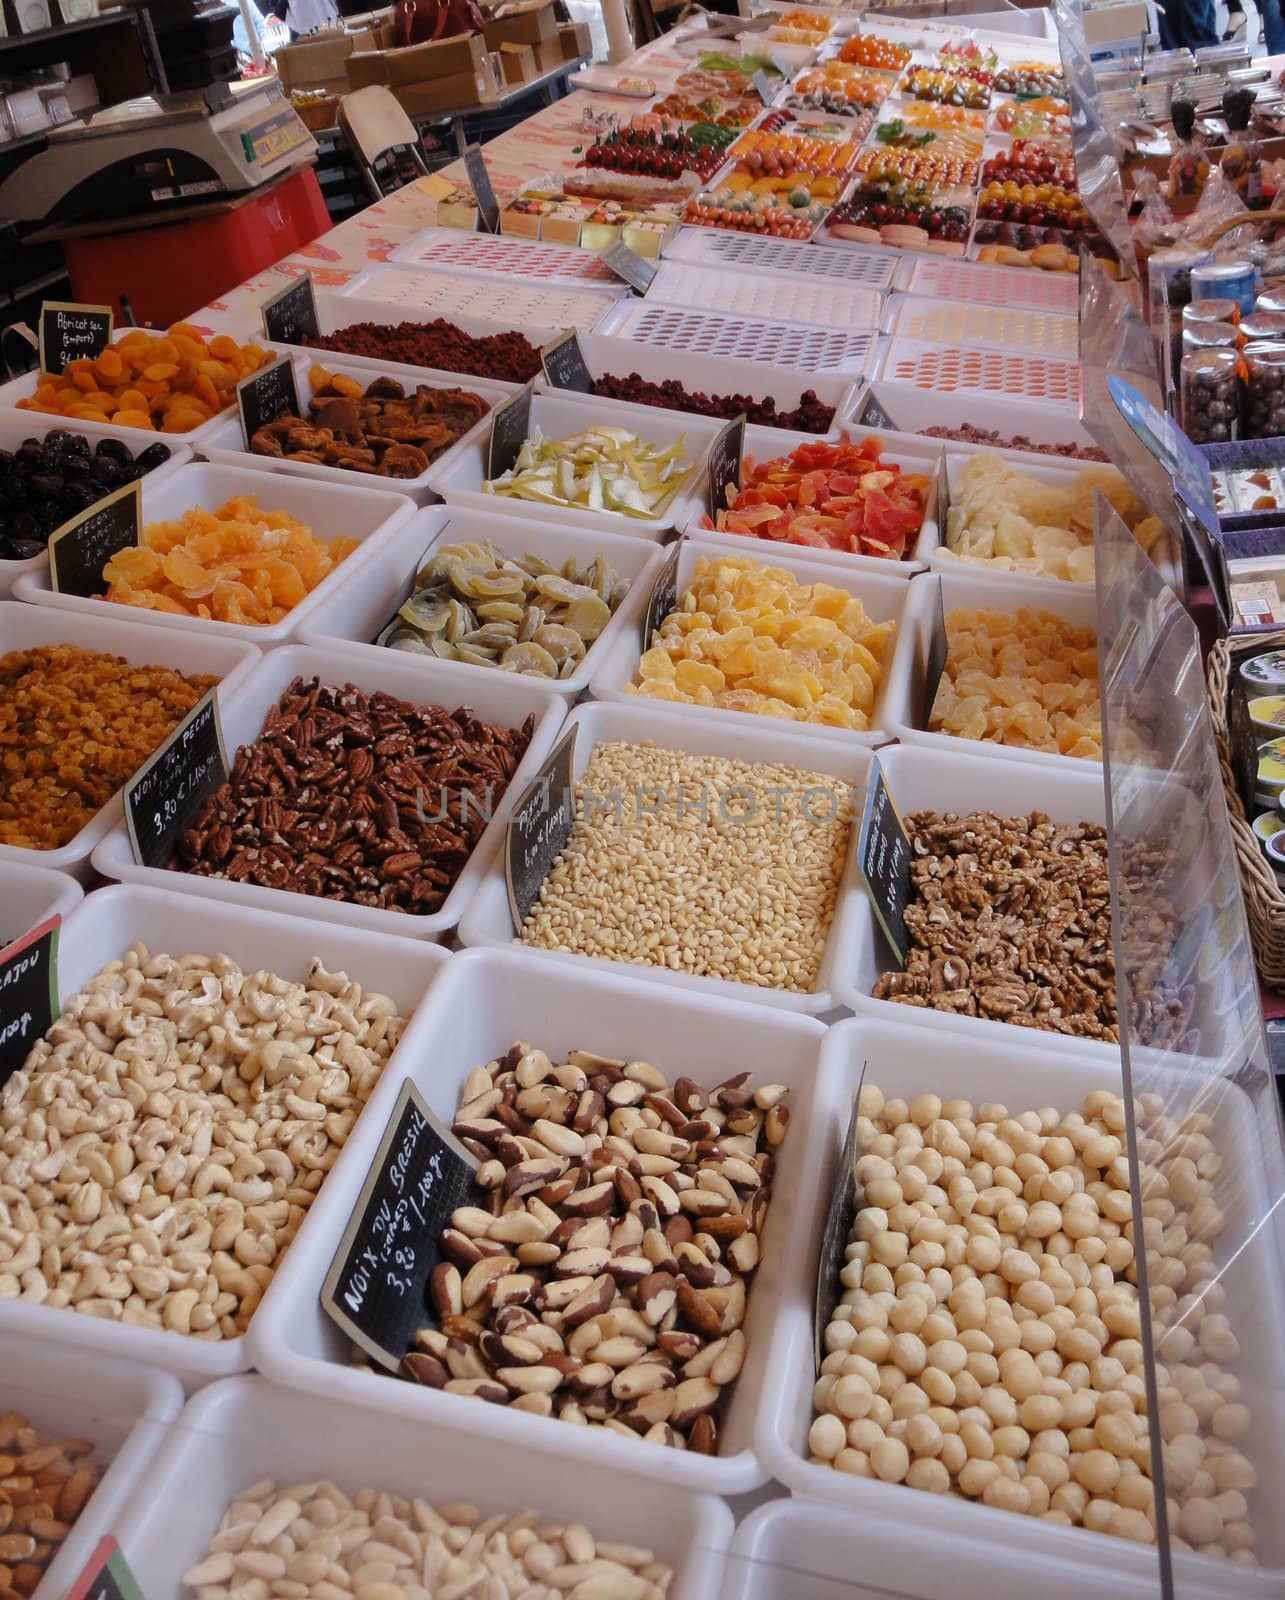 A variety of fruits and nuts being sold on a street market stall